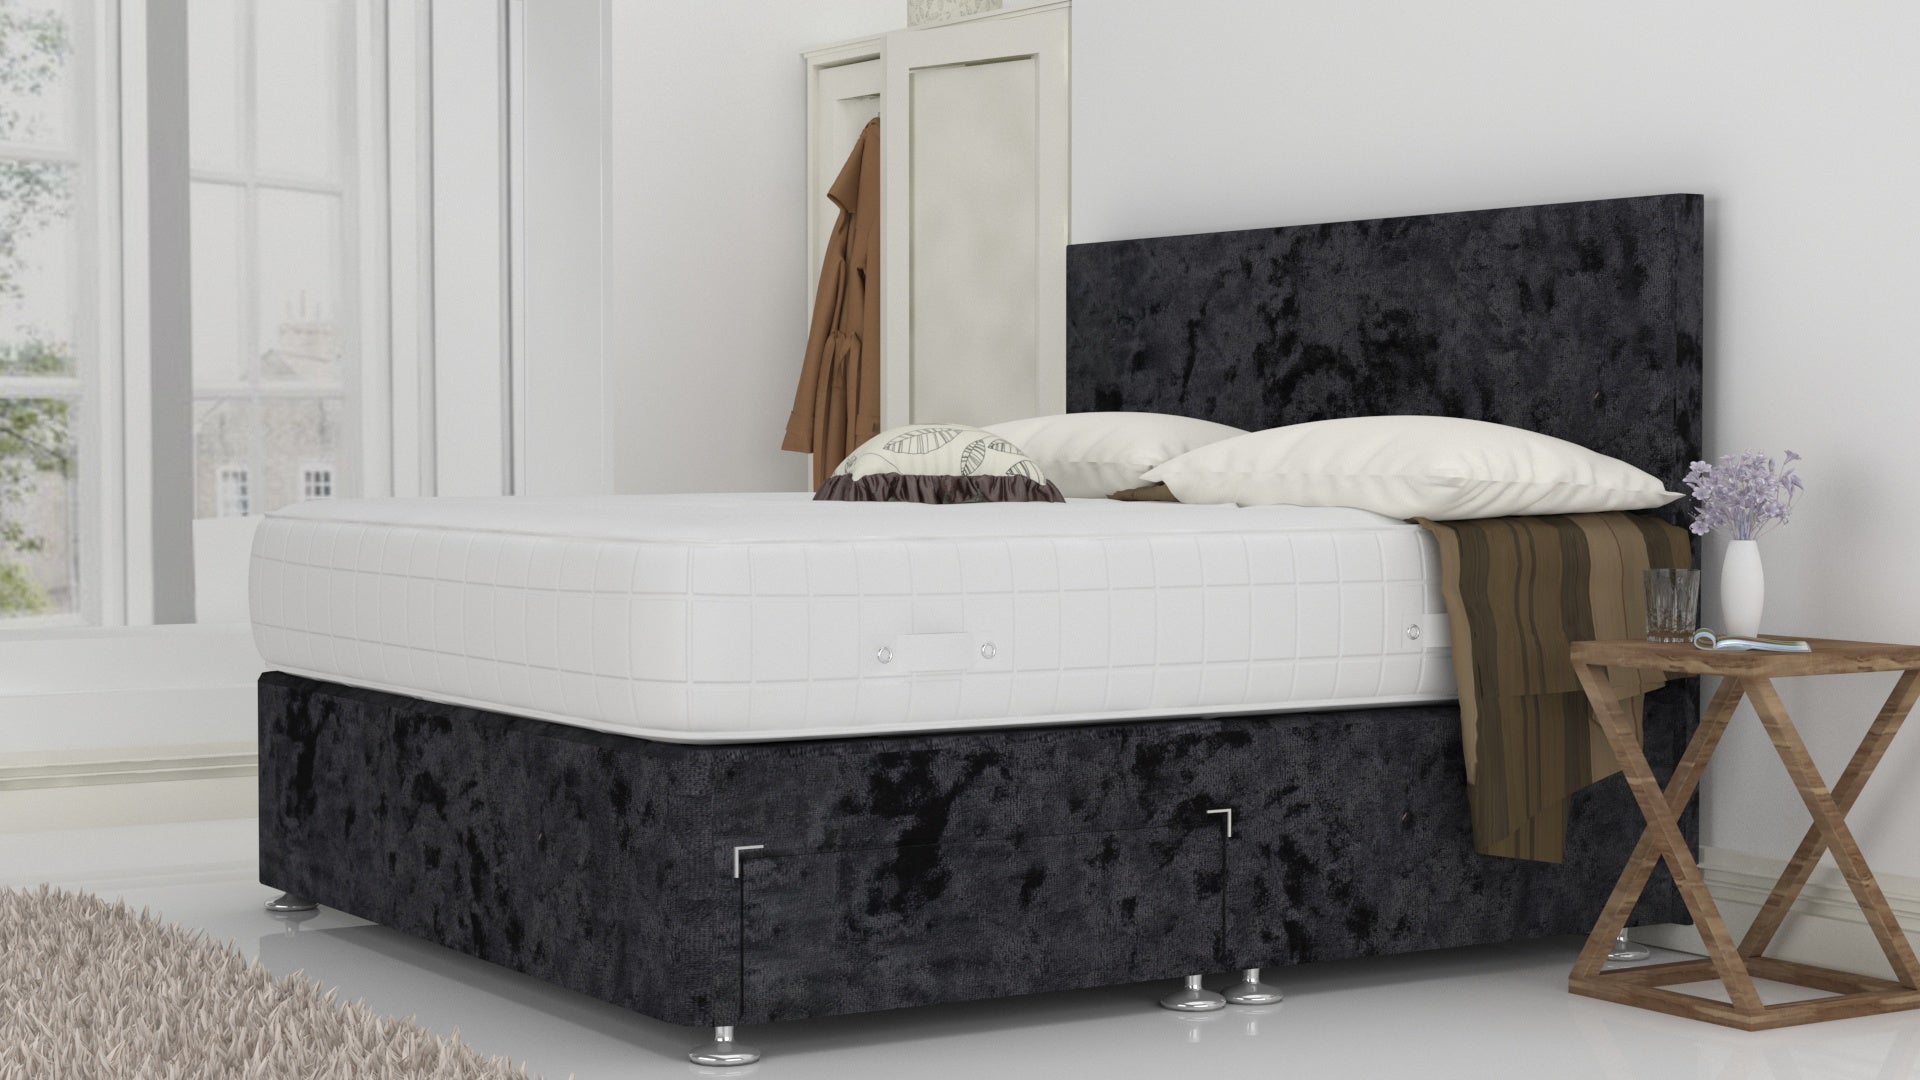 Black Crushed 4FT 6" Divan Bed Set With Plain Headboard (Included Feet) And Free Memory Foam Mattress